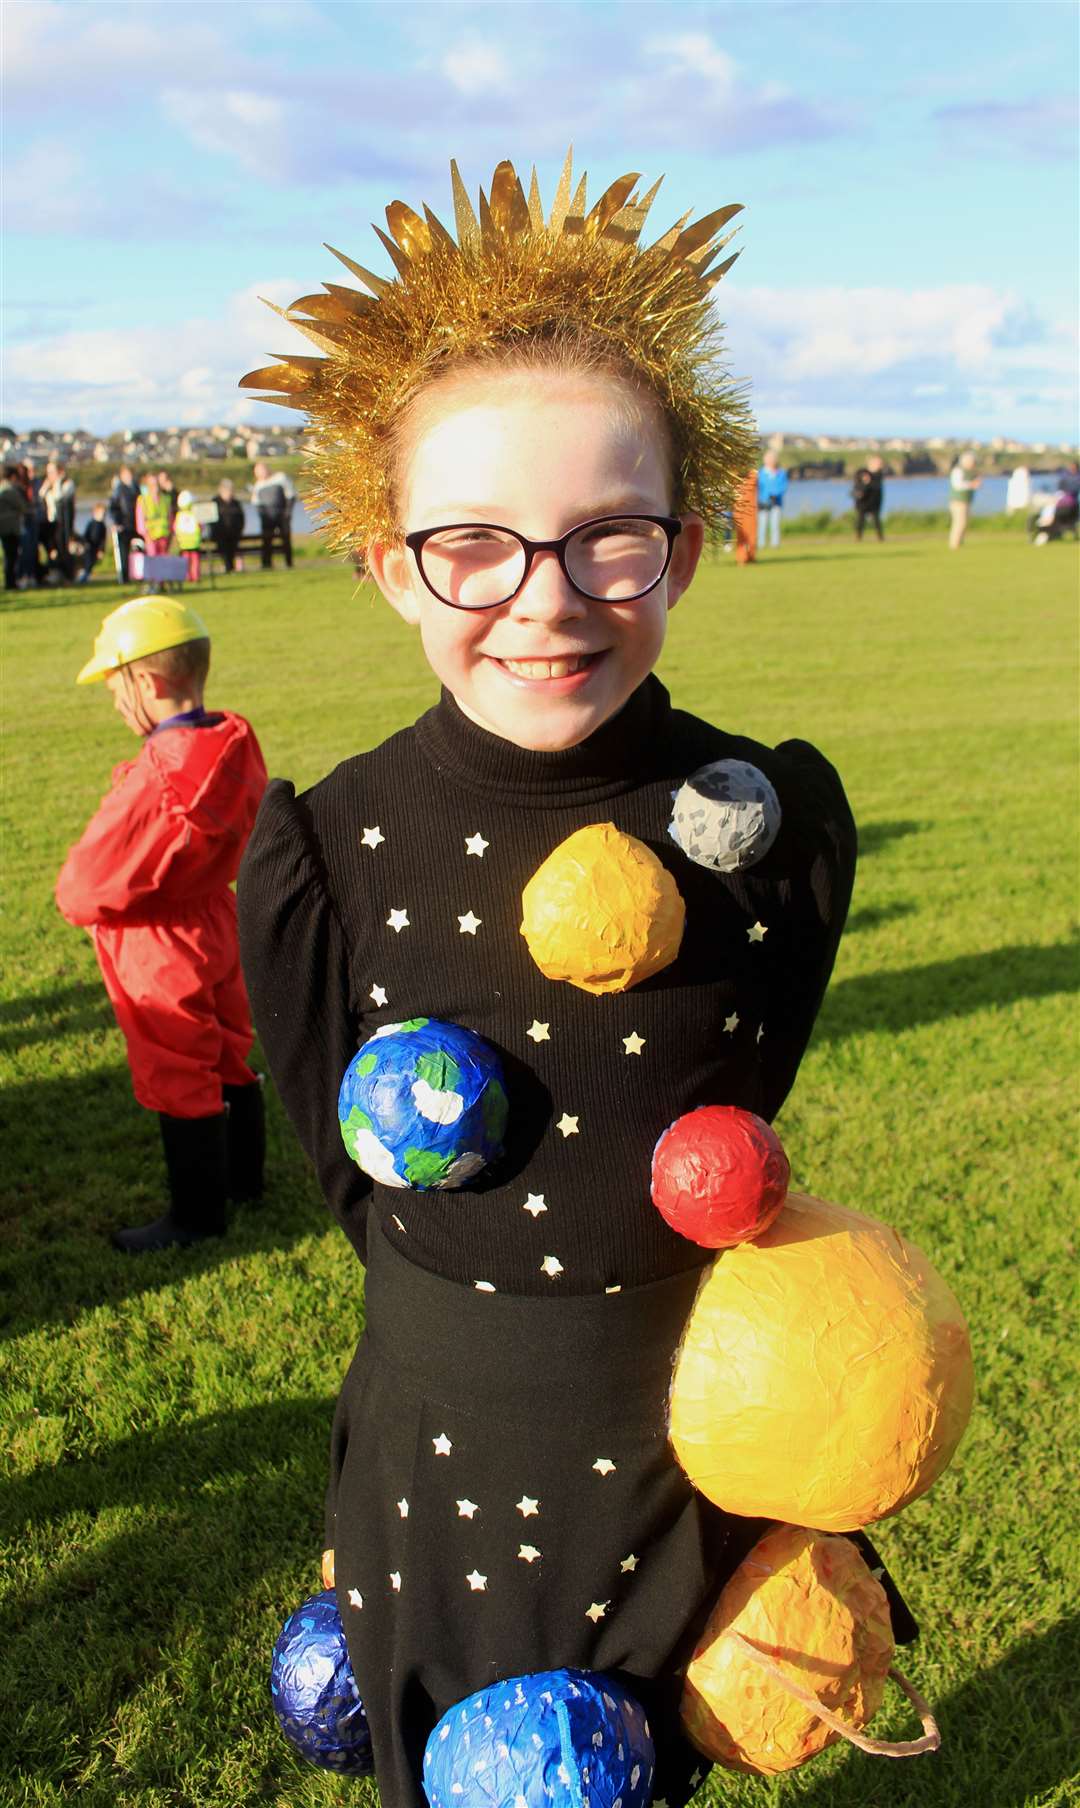 Nine-year-old Ayla Sinclair took a first prize for her solar system costume. Picture: Alan Hendry